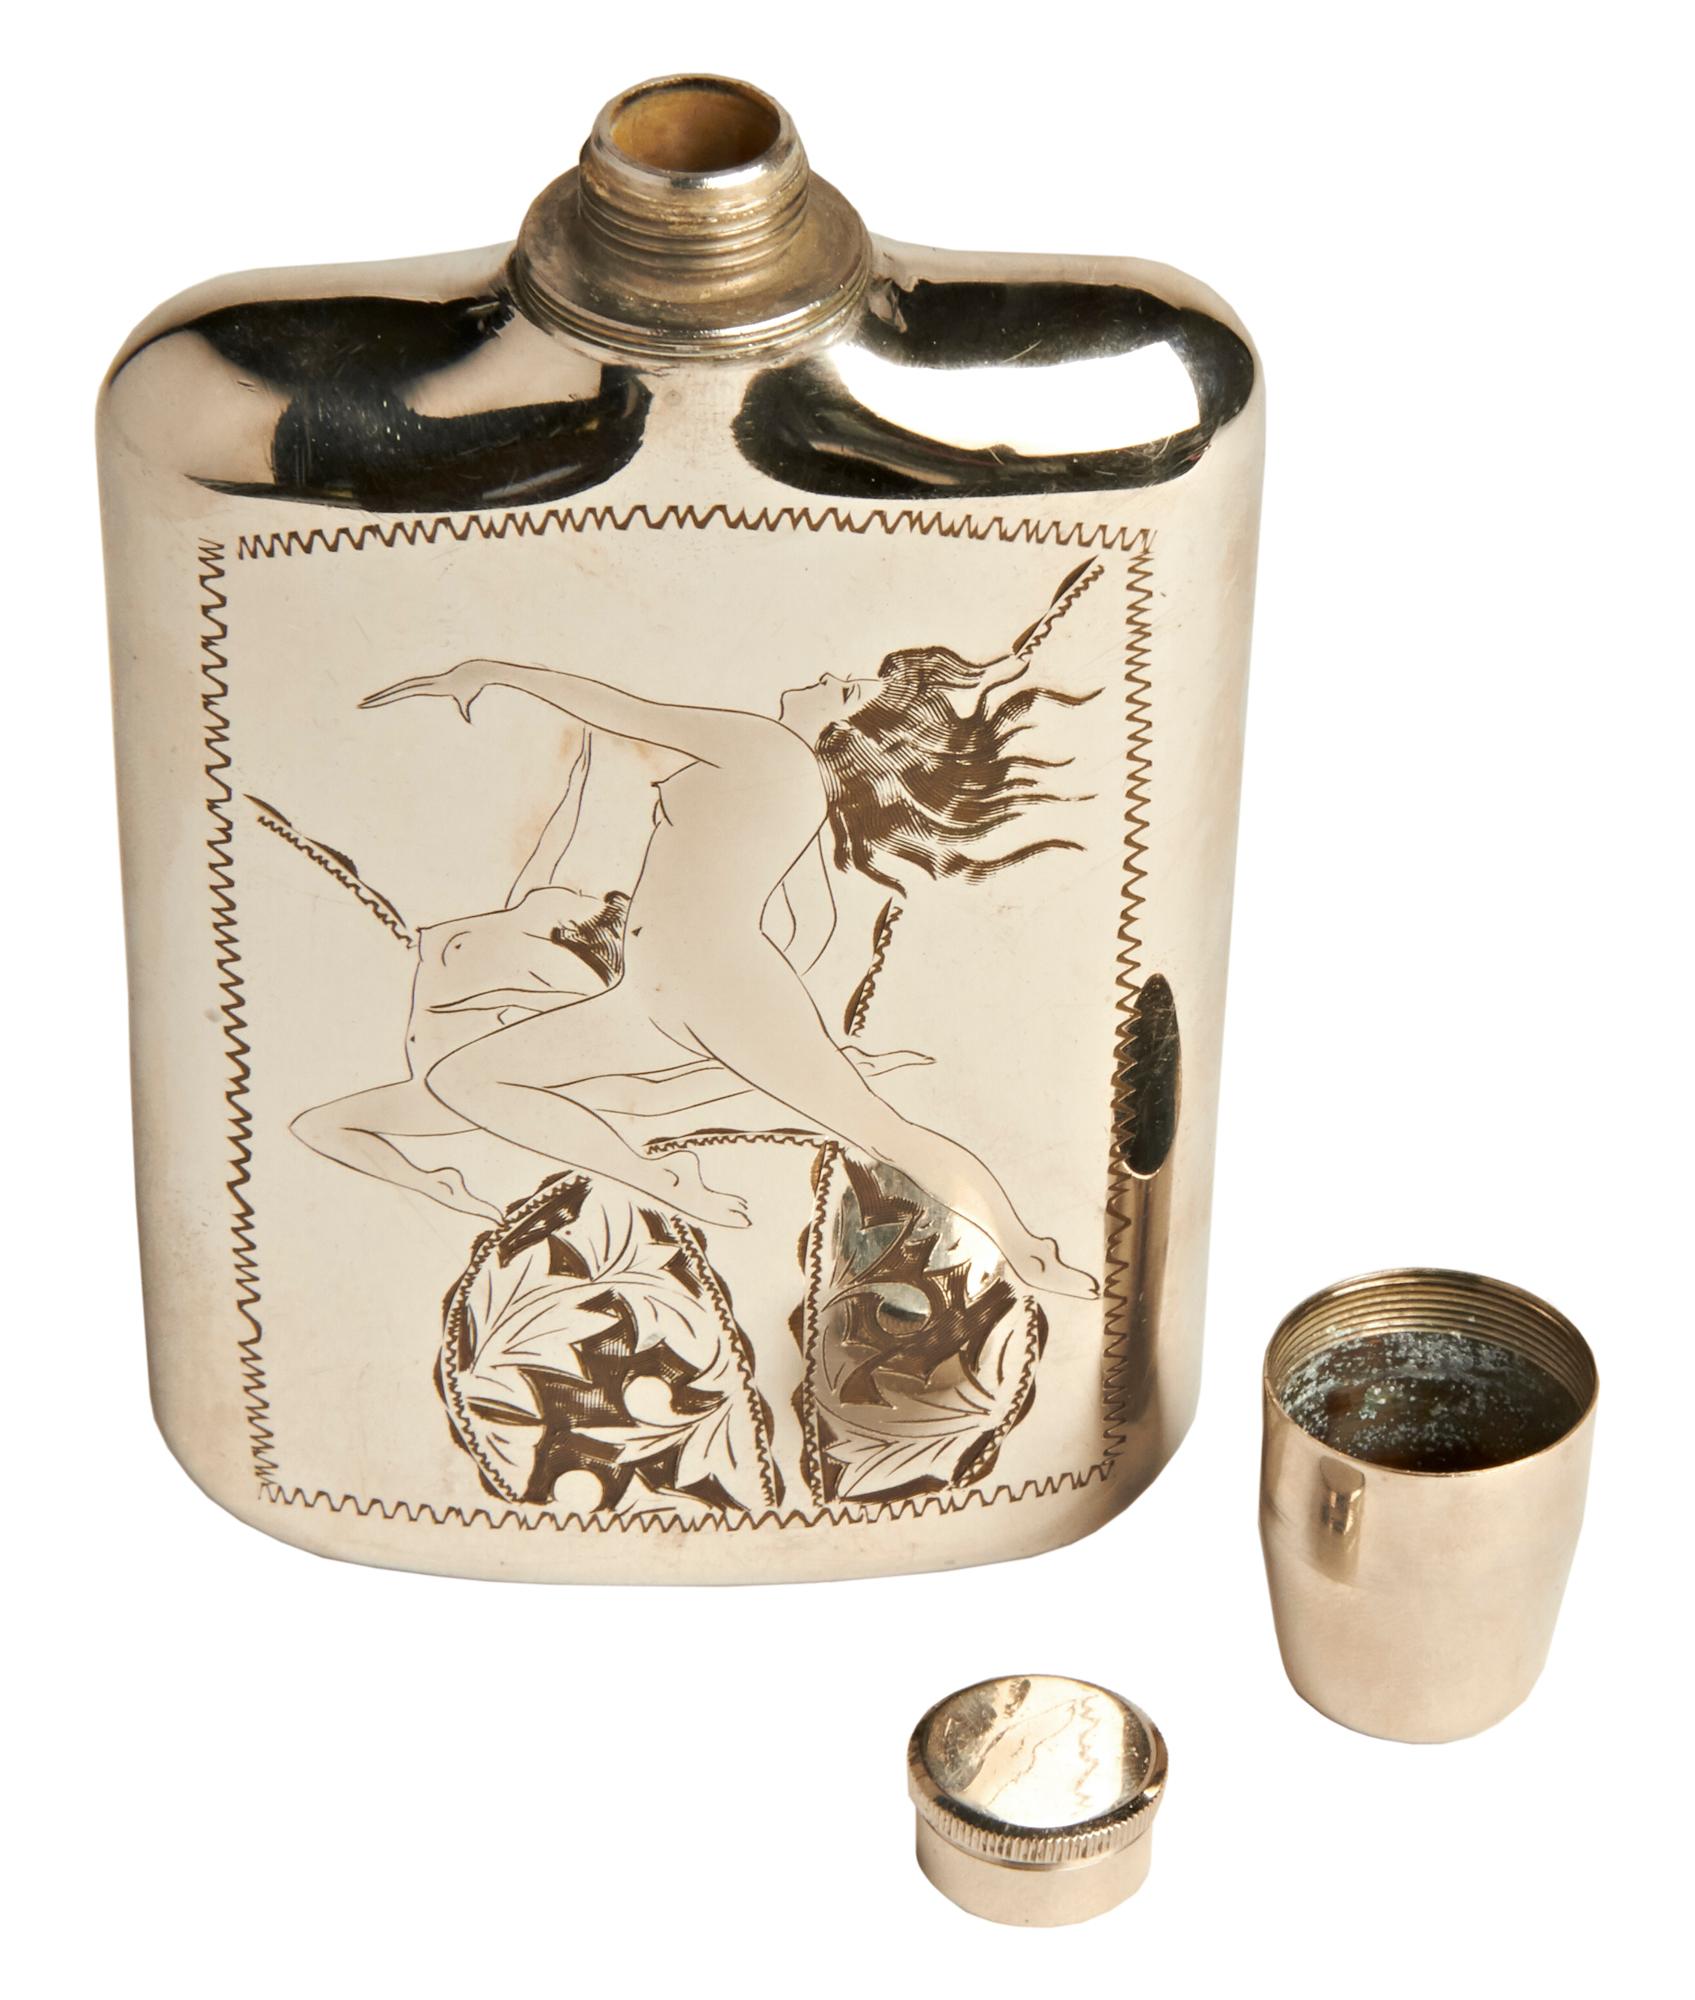 This rare Japanese midcentury chrome plated, hand engraved hip flask was manufactured by the Prince Manufacturing company during the Postwar American occupation of Japan. The pieces in the Prince range were each hand engraved with nude female